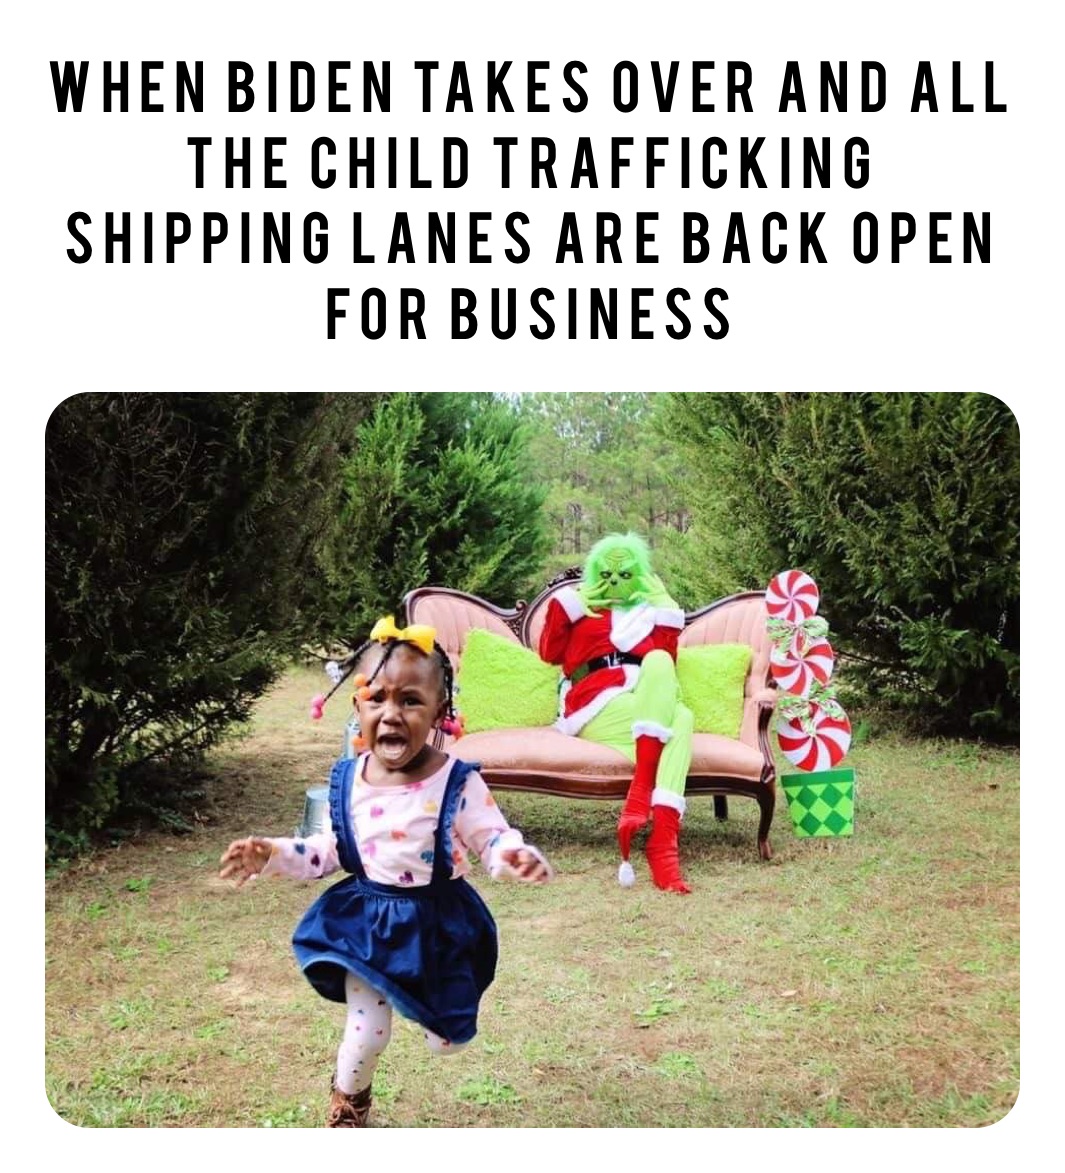 When Biden takes over and all the child trafficking shipping lanes are back open for business How it’s gonna be when Biden takes over and all the child trafficking shipping lanes are back open for business